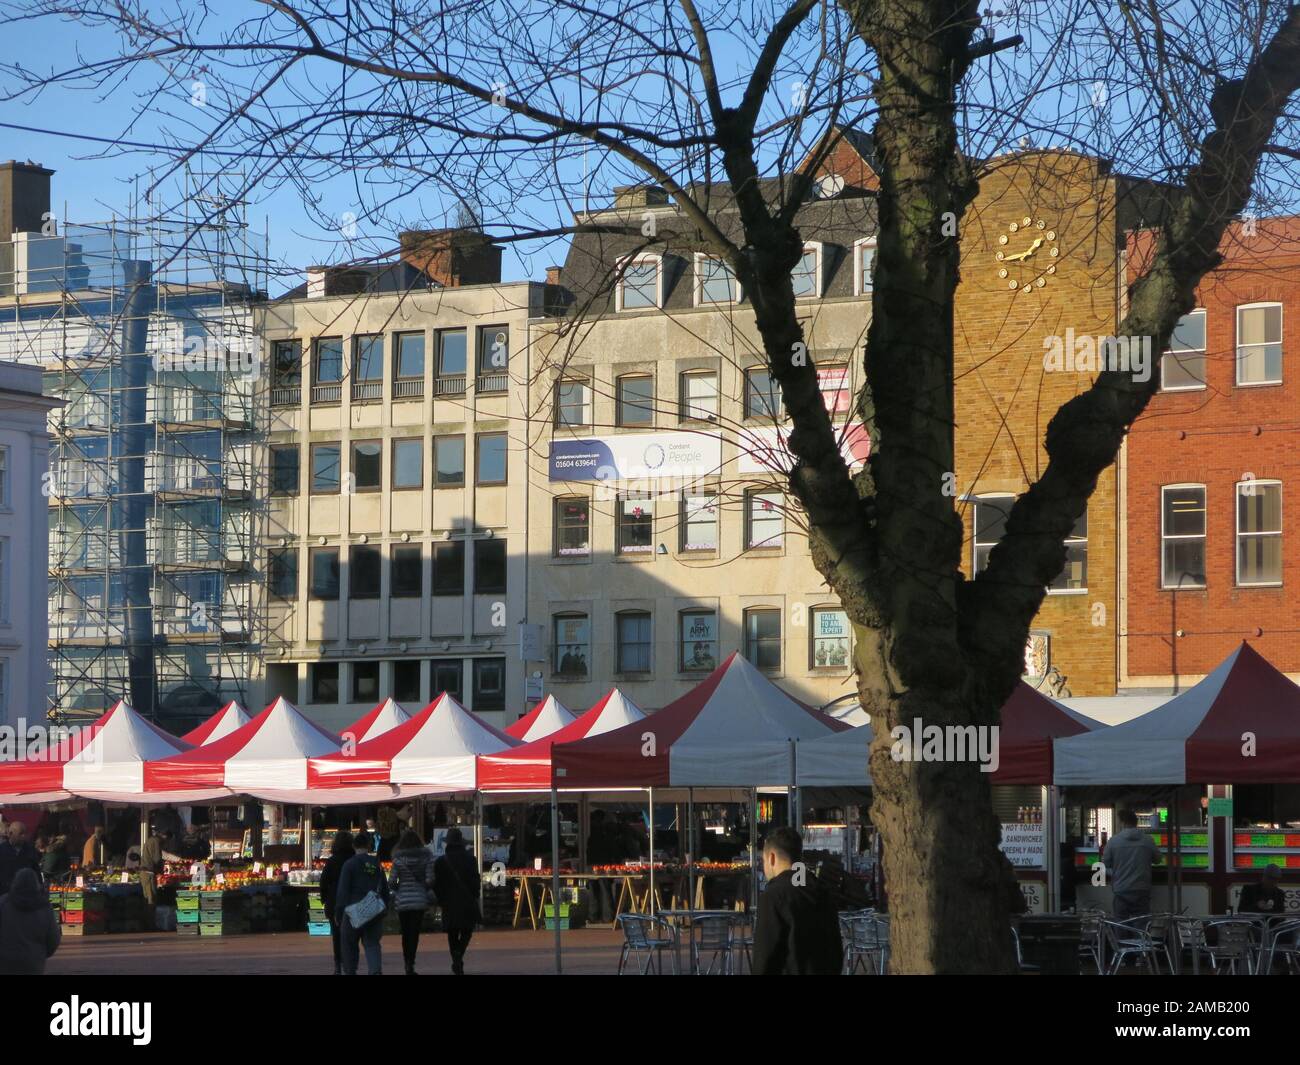 View of the traditional open-air market square in Northampton's town centre with red & white awnings covering the traders' stalls; January 2020 Stock Photo